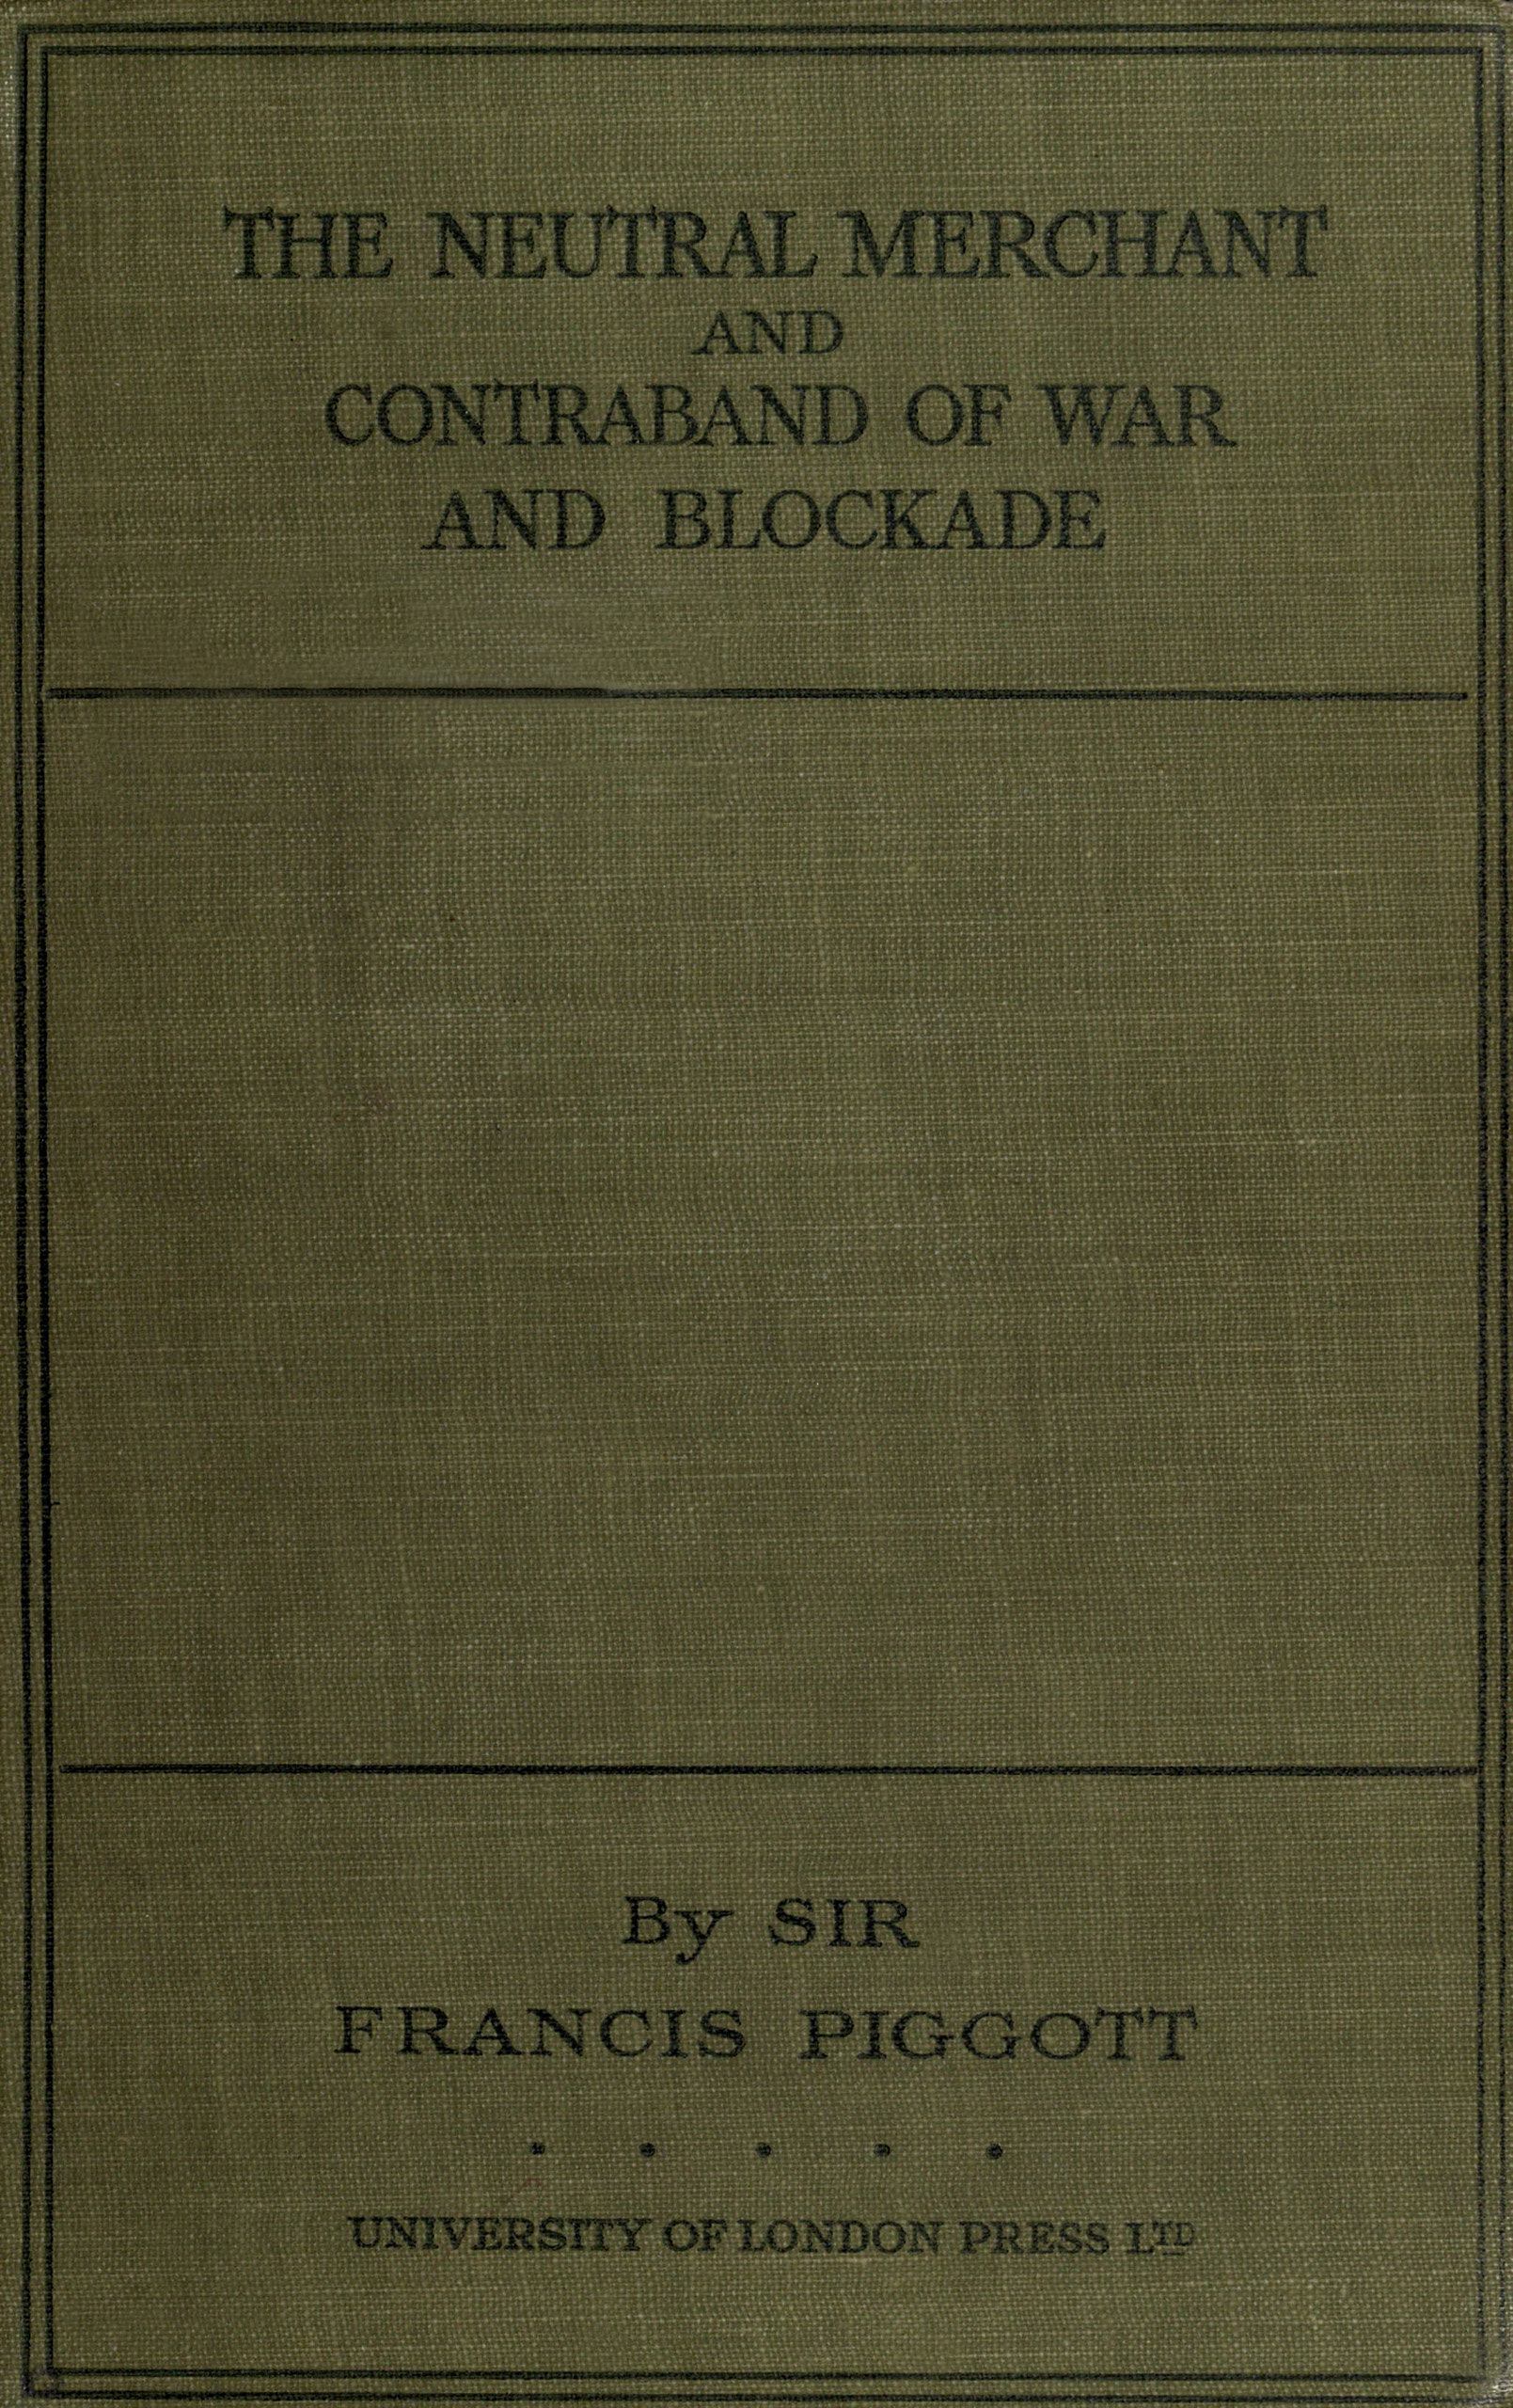 The neutral merchant&#10;in relation to the law of contraband of war and blockade under the order in Council of 11th March, 1915